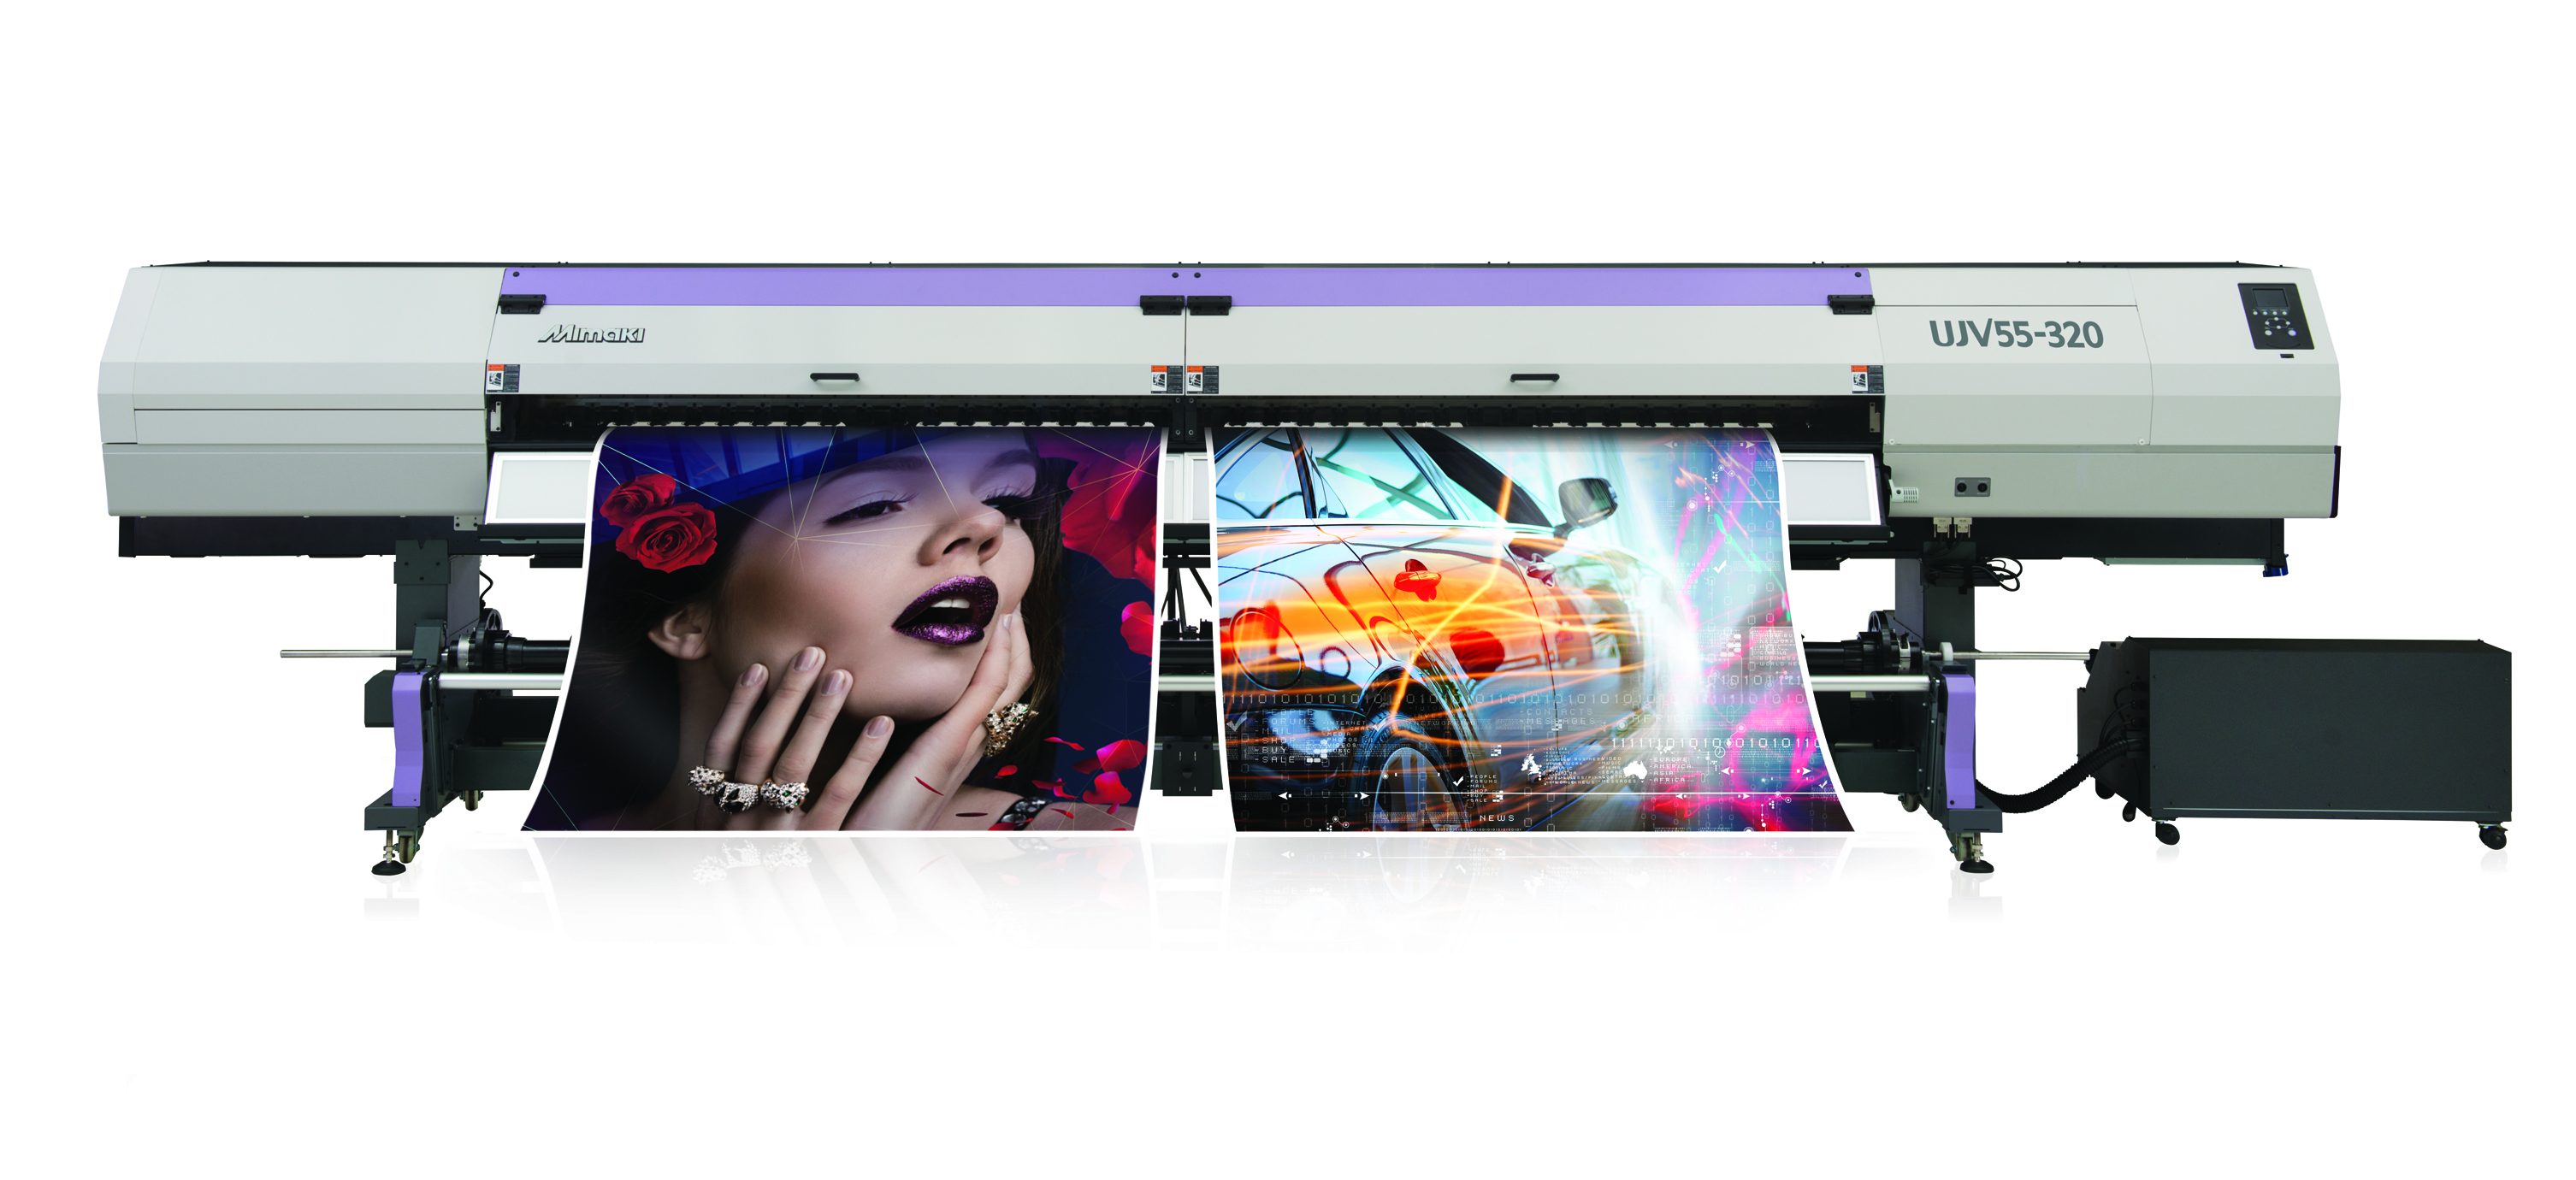 Mimaki is to show a comprehensive range of solvent and UV solutions to start or grow your business at drupa 2016 in Düsseldorf.